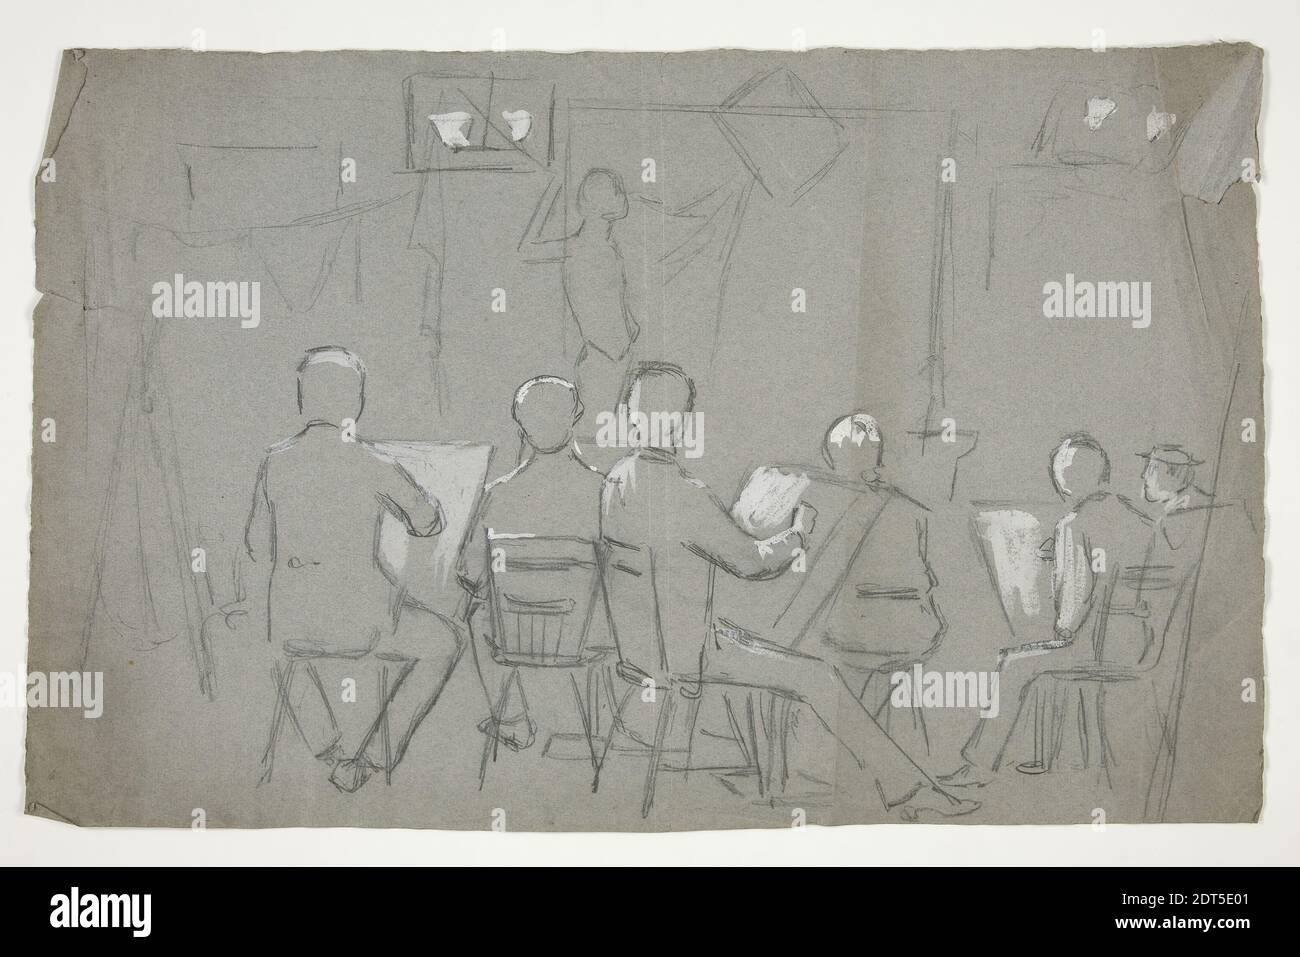 Artist: Edwin Austin Abbey, American, 1852–1911, M.A., 1897, Sketch of a room of students drawing a model, Graphite, white gouache, Blue laid, 29.2 × 46.4 cm (11 1/2 × 18 1/4 in.), Made in United States, American, 19th century, Works on Paper - Drawings and Watercolors Stock Photo